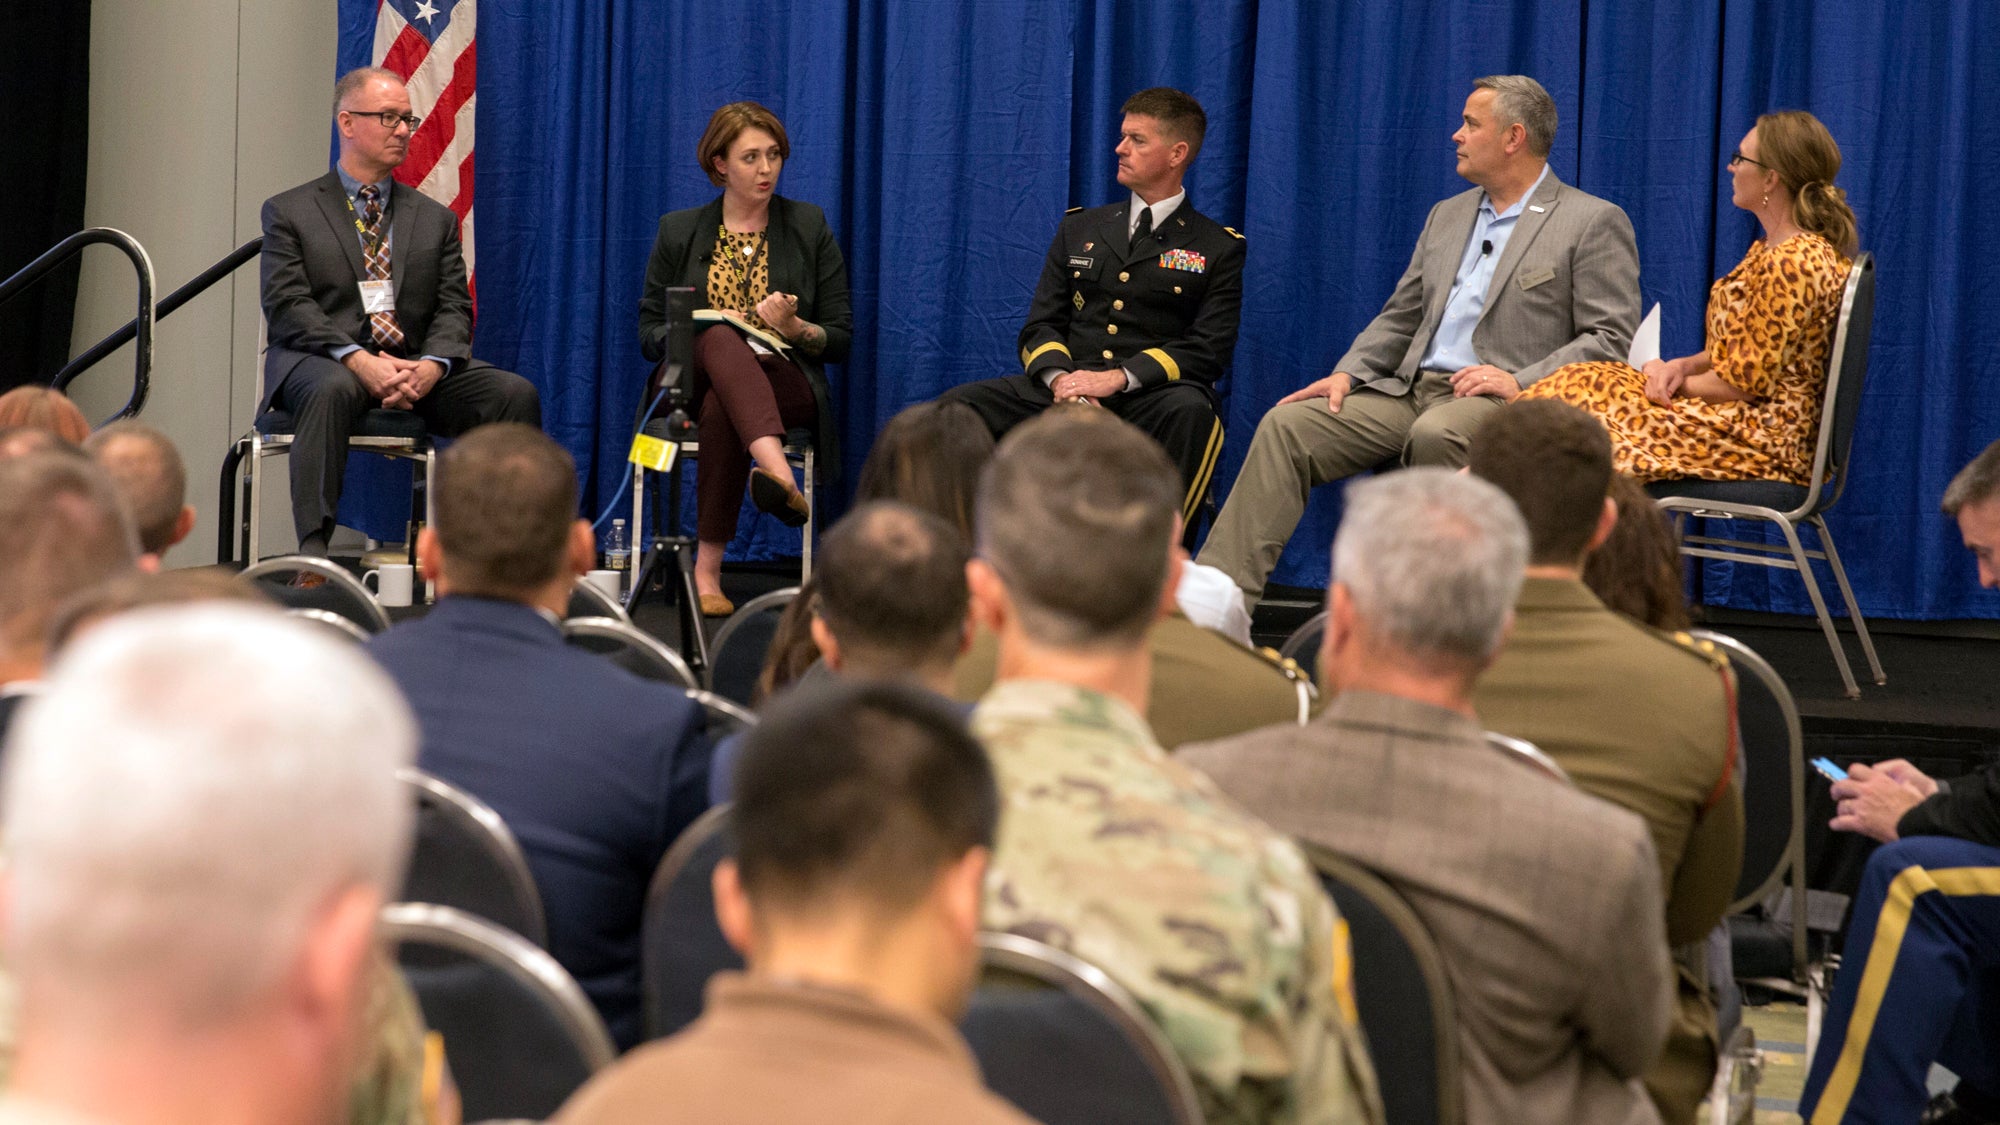 A panel of experts discuss the risks and rewards of engaging on social media during a session titled “Risky Business – Leadership in the Information Age,” Oct. 14 at the AUSA 2019 Annual Meeting and Exposition.